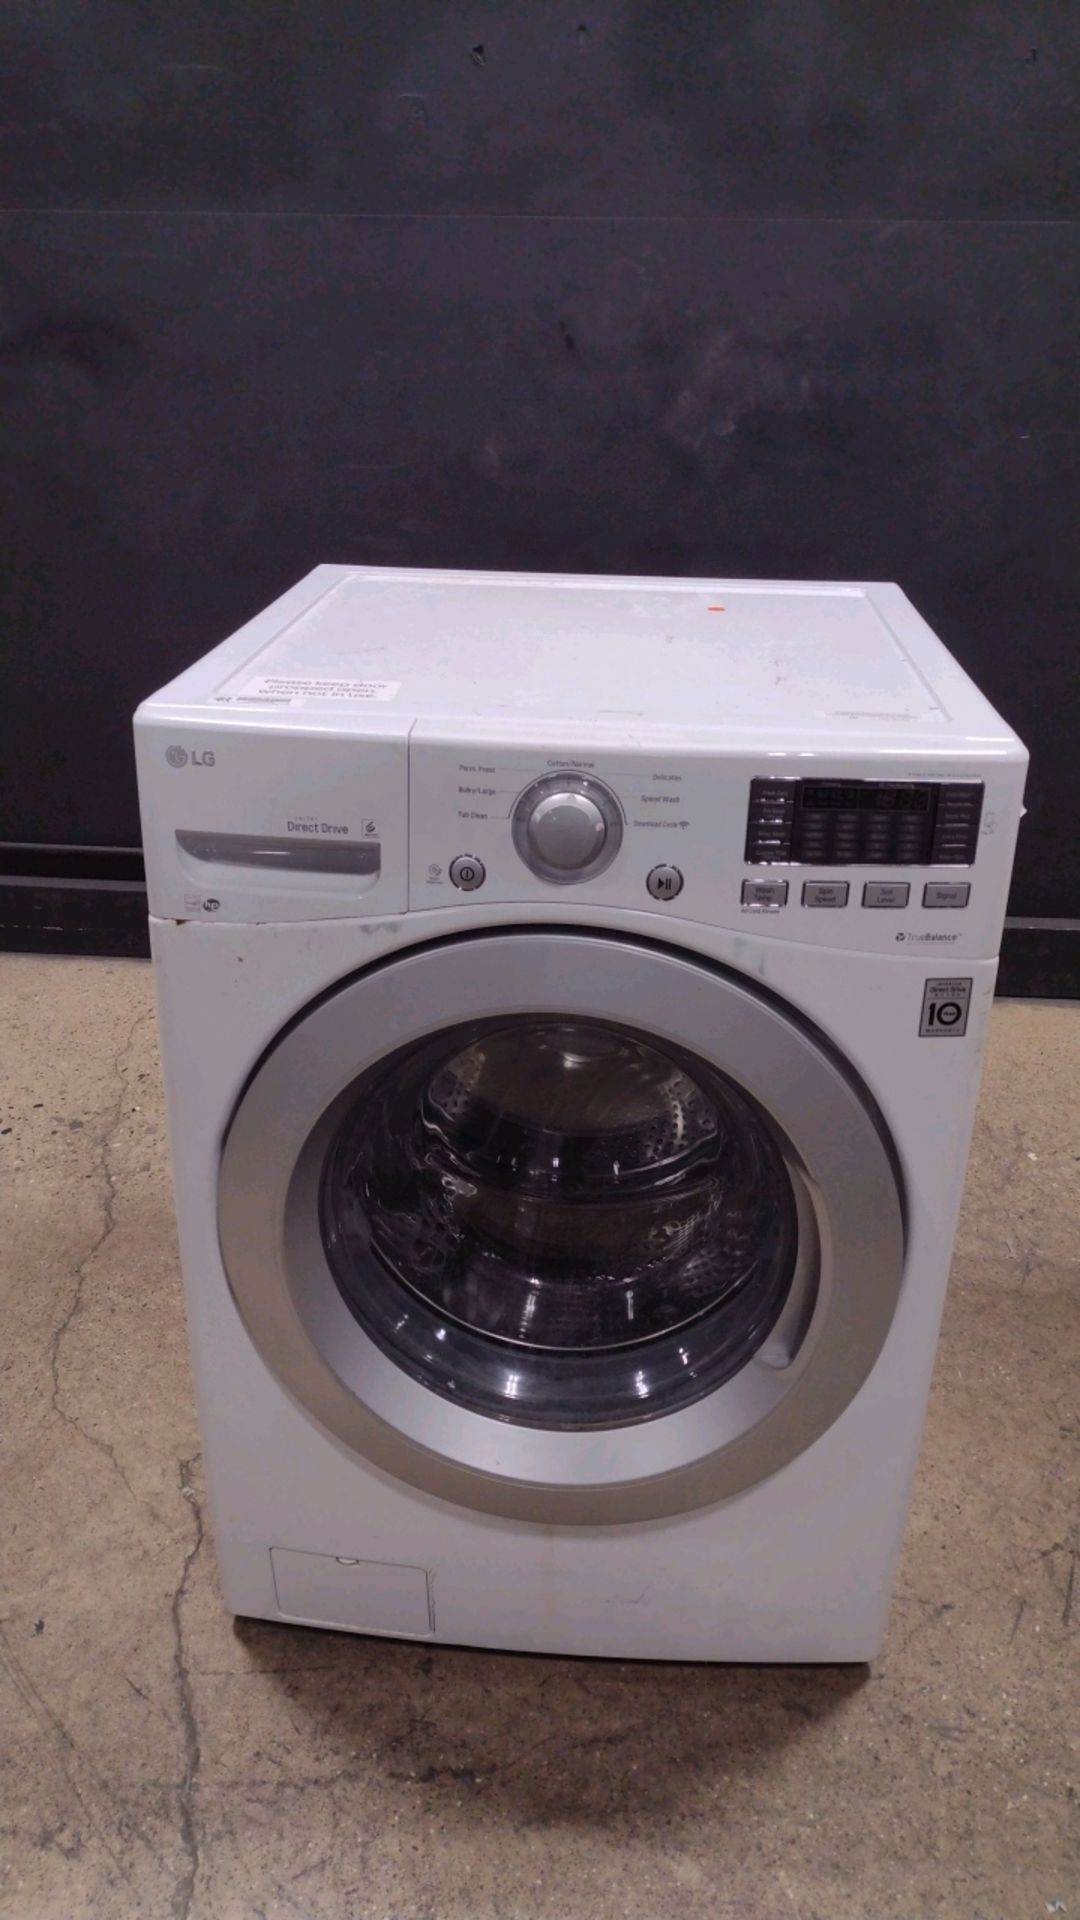 LG WM3170CW WASHER MACHINE (LOCATED AT 3325 MOUNT PROSPECT ROAD, FRANKLIN PARK, IL, 60131)